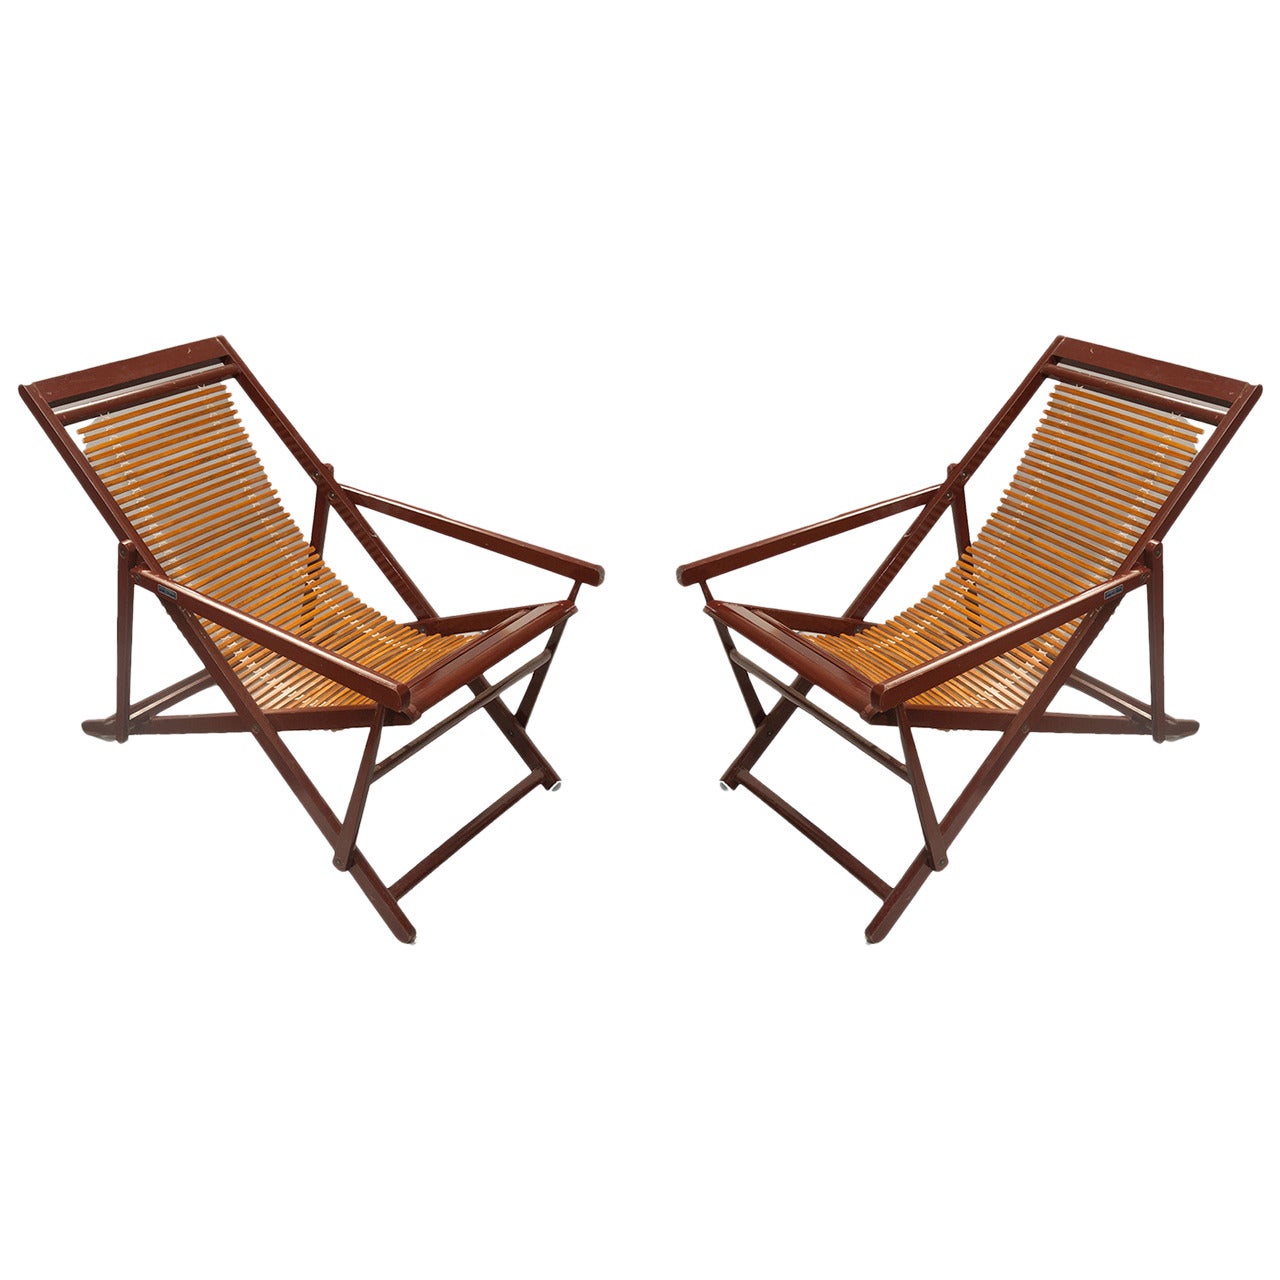 Pair of Vintage Chinese Bamboo and Lacquer Slat-Back Reclining Lounge Chairs